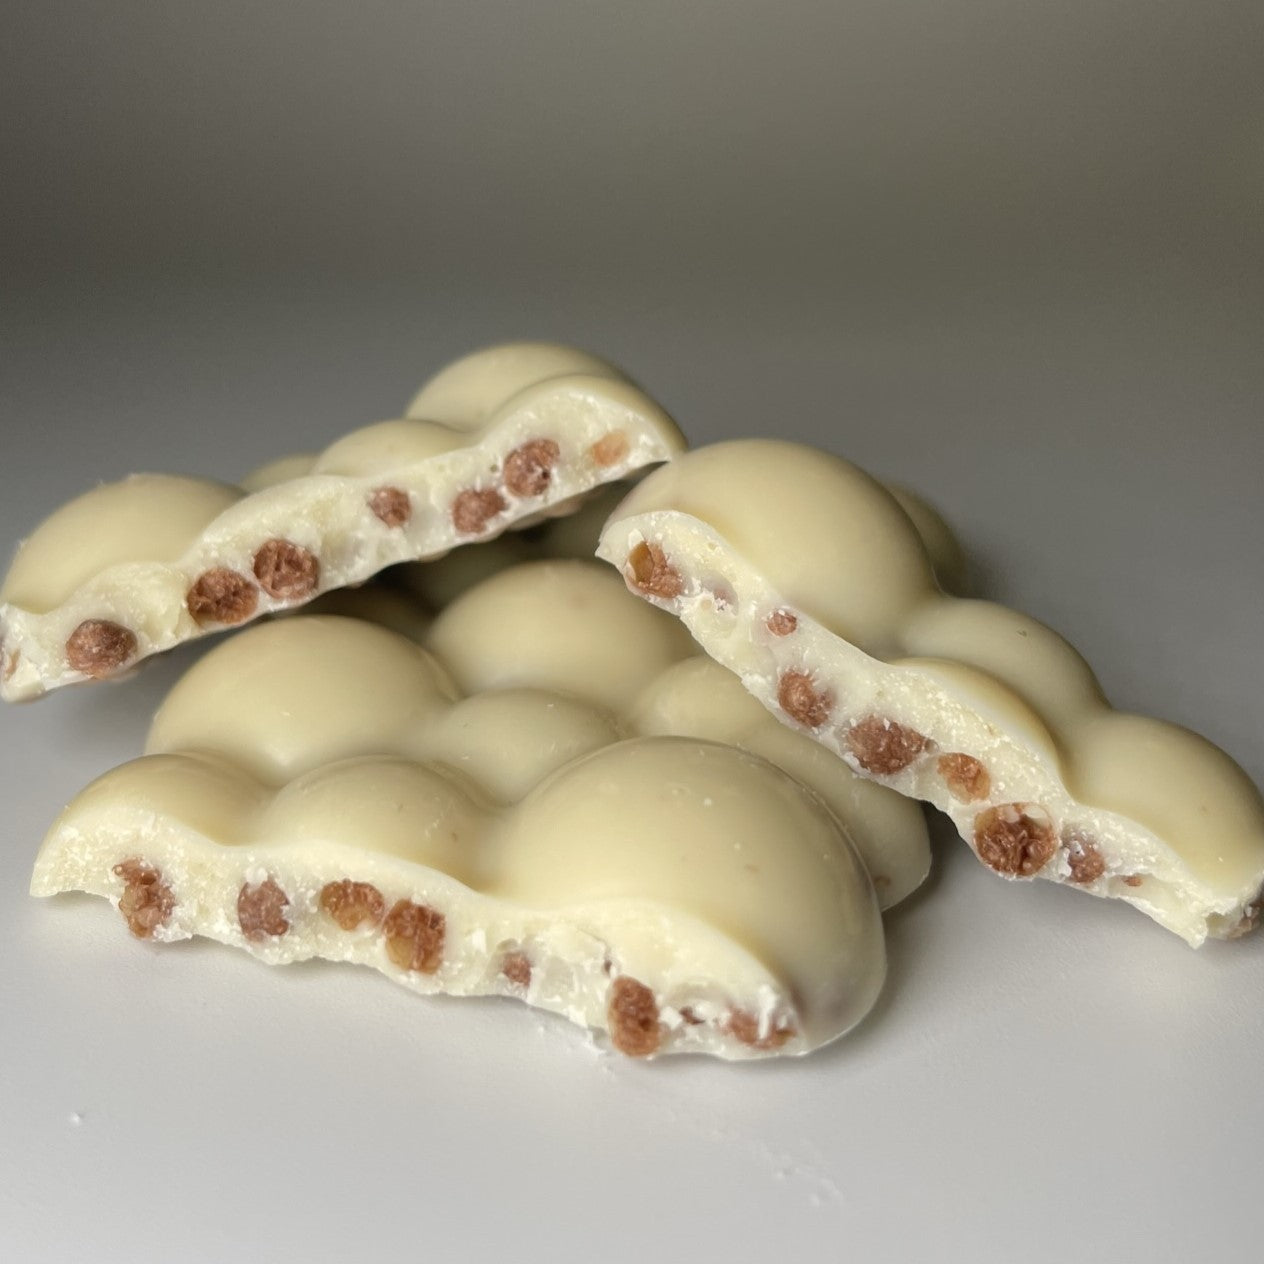 Wonky Choc Dairy Free White Cocoa bar with Biscuit Cocoa Rice Balls Pieces 500g